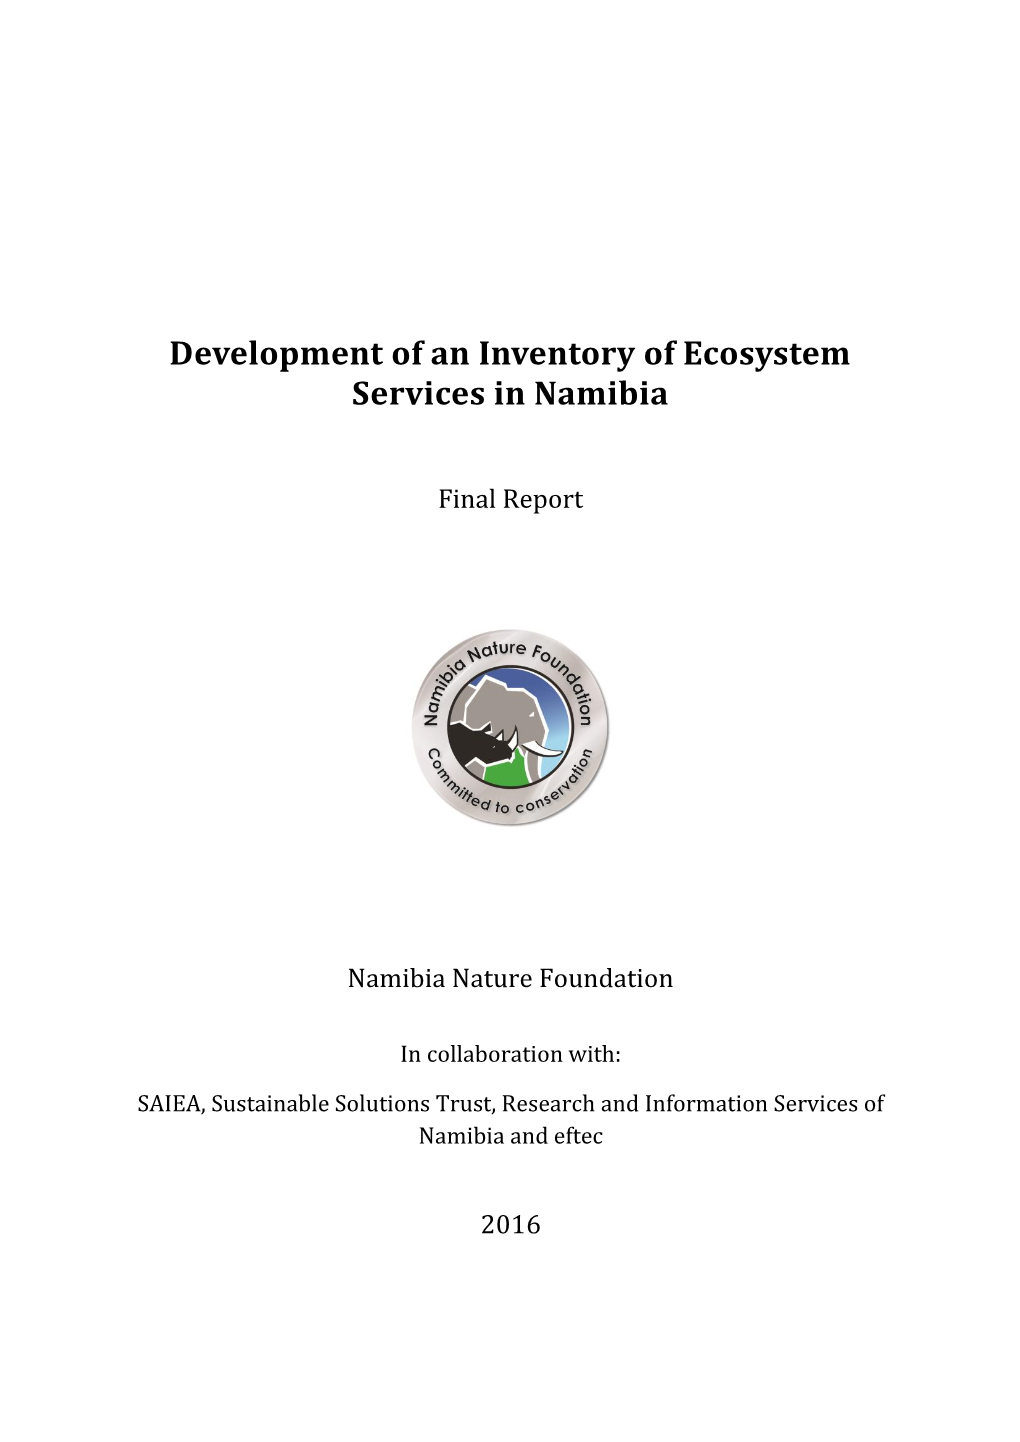 Development of an Inventory of Ecosystem Services in Namibia